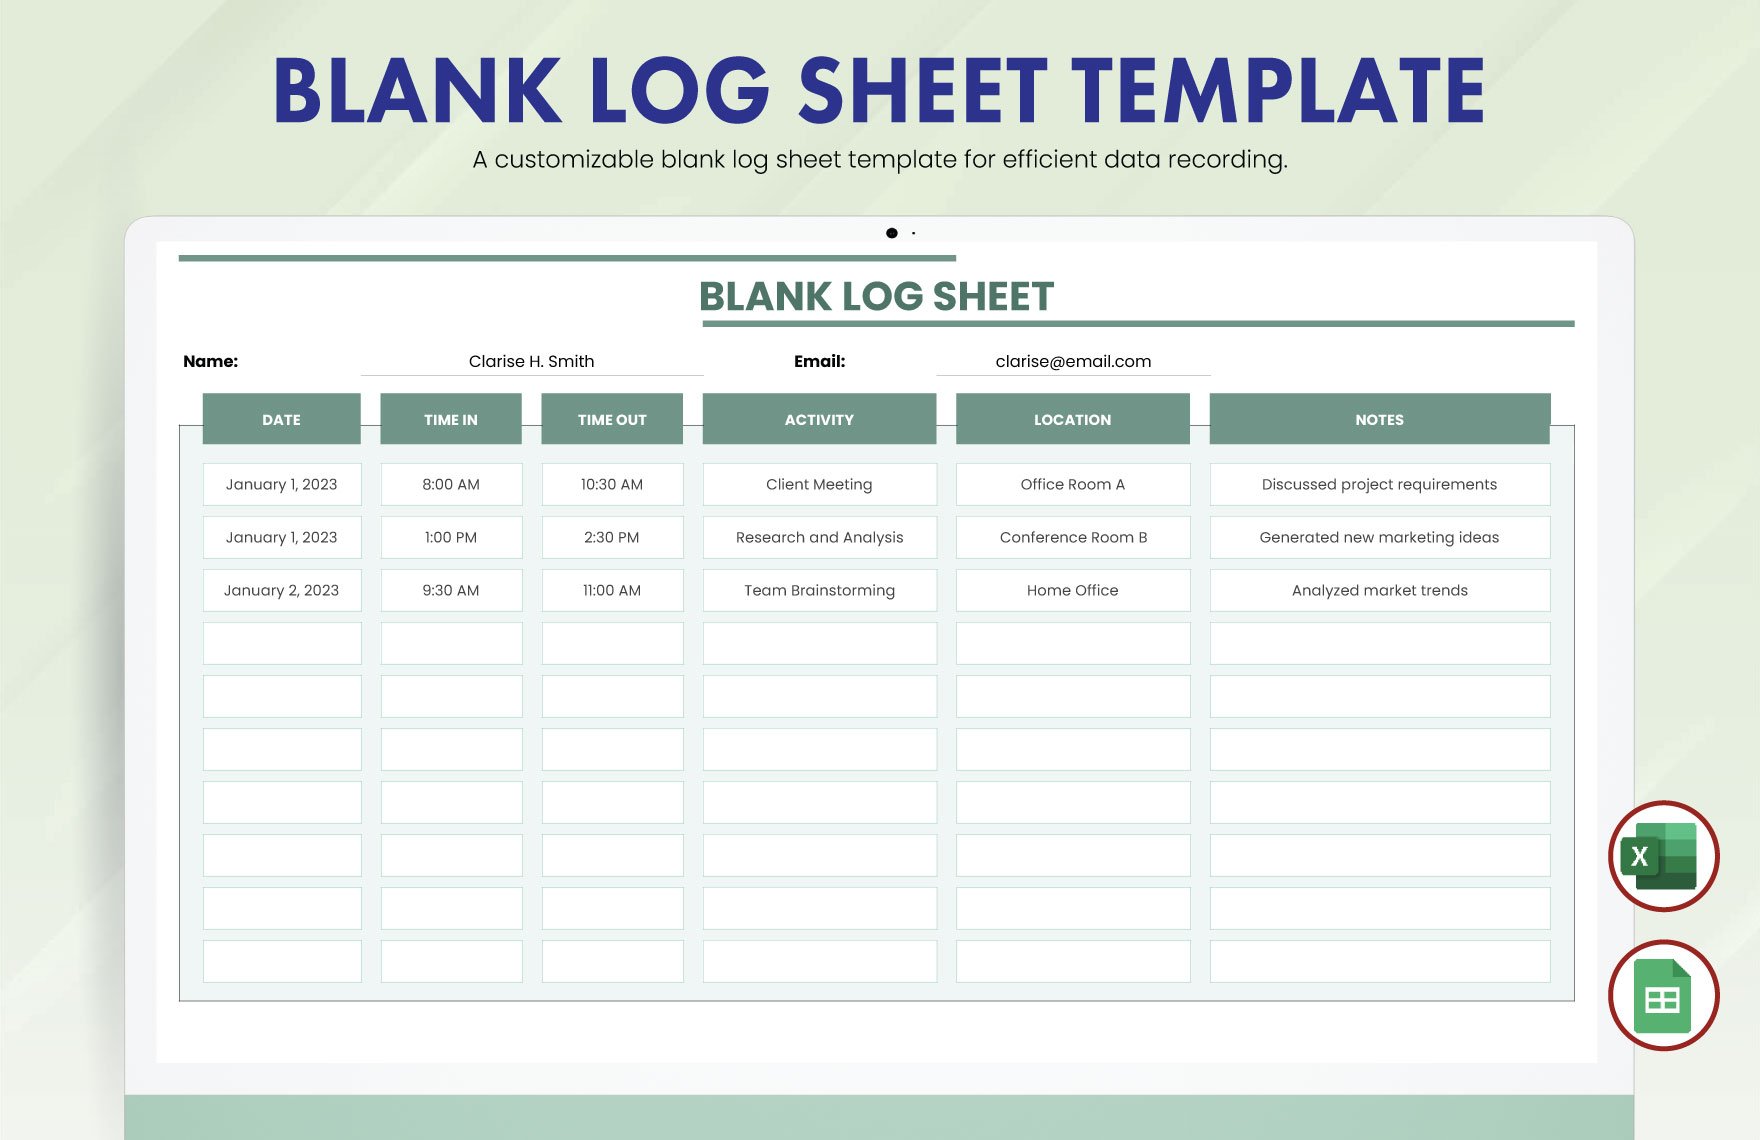 Free Blank Log Sheet Template in Excel, Google Sheets